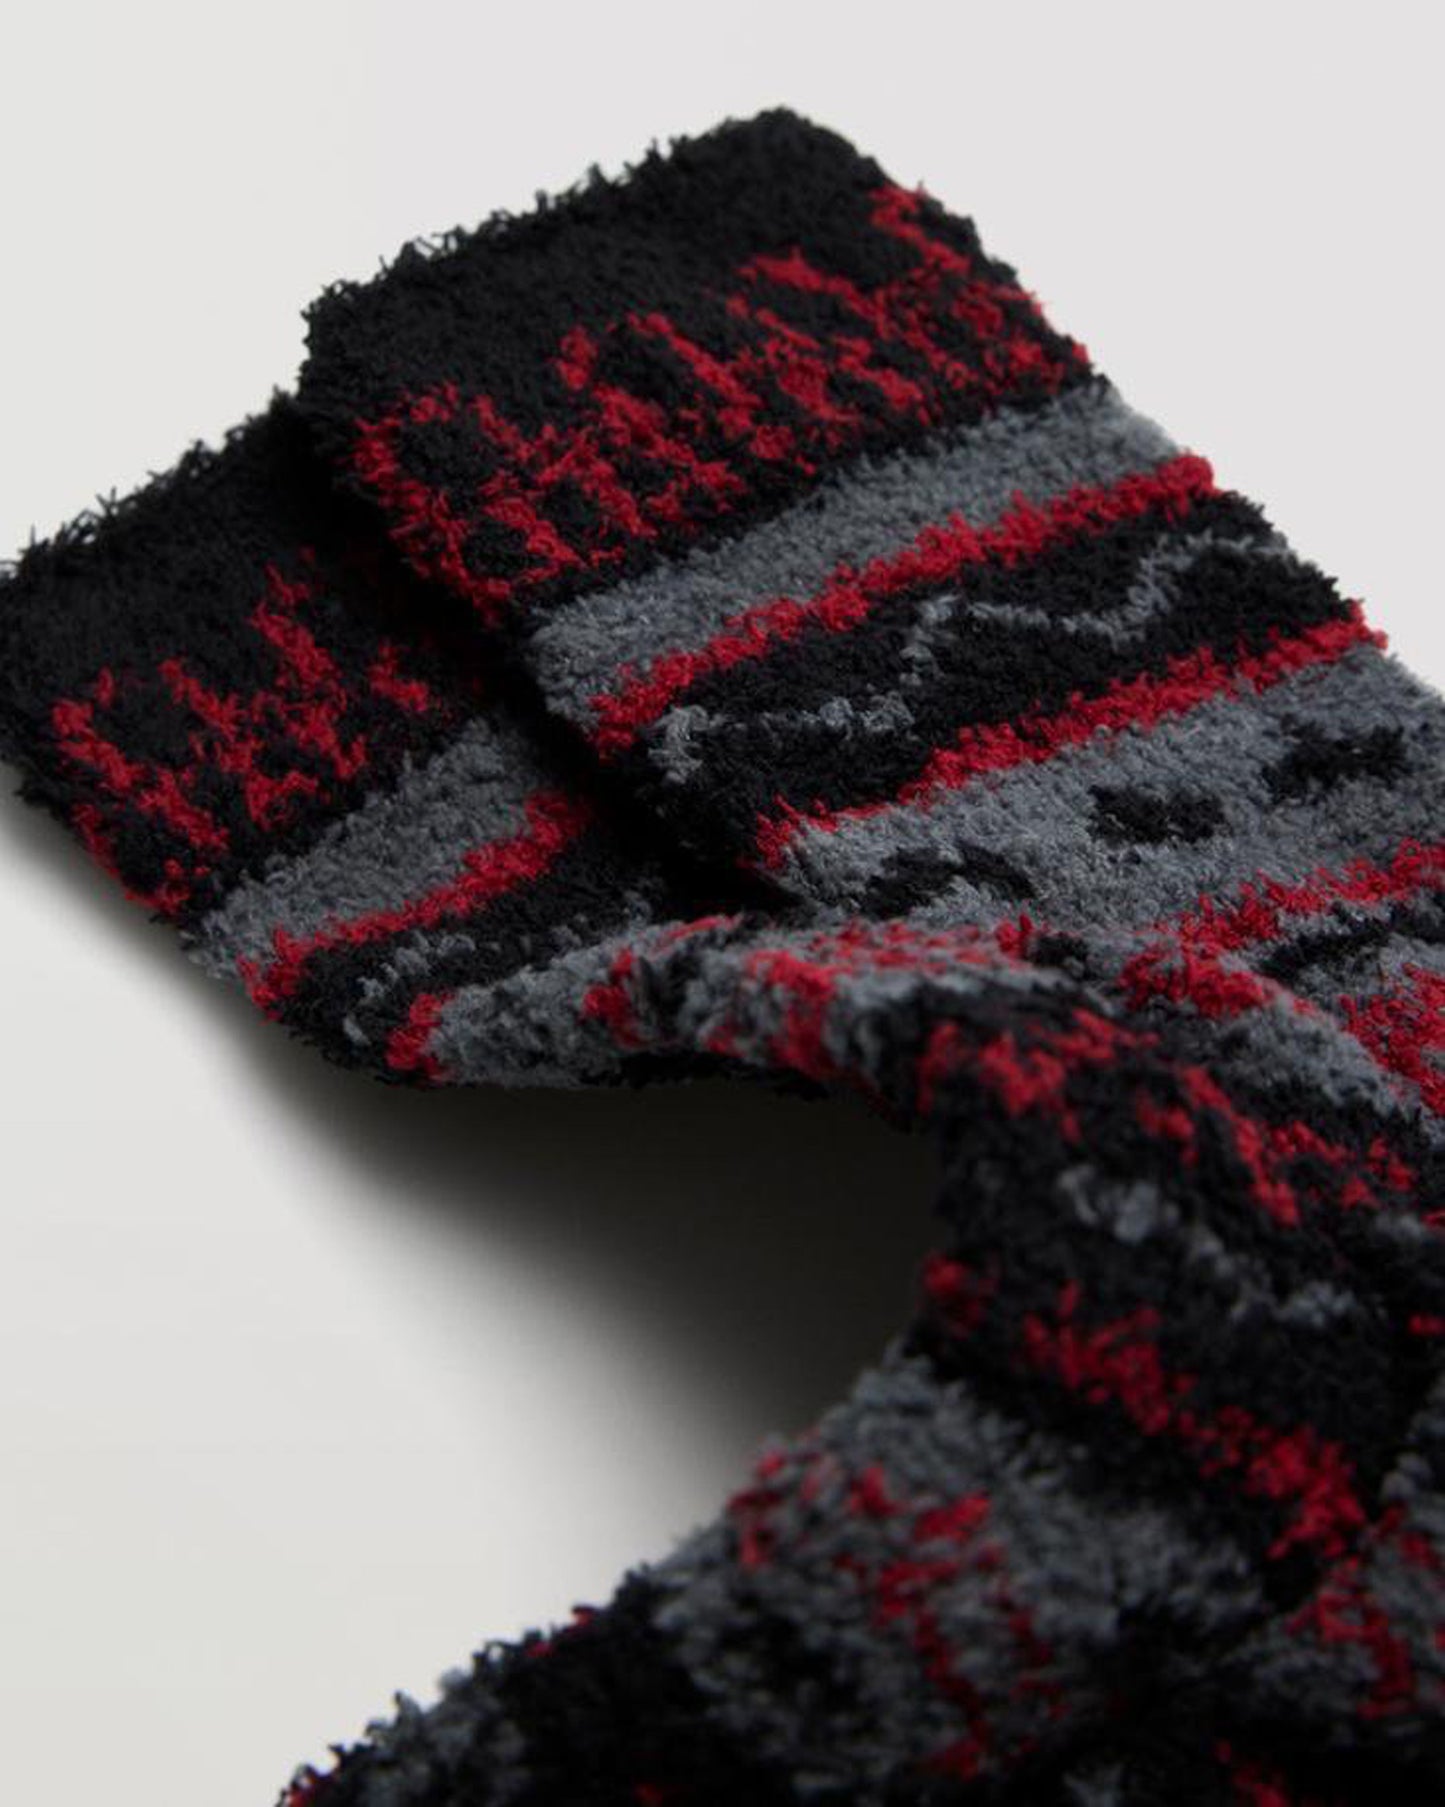 Soft, fluffy and warm patterned socks in black, red and grey.